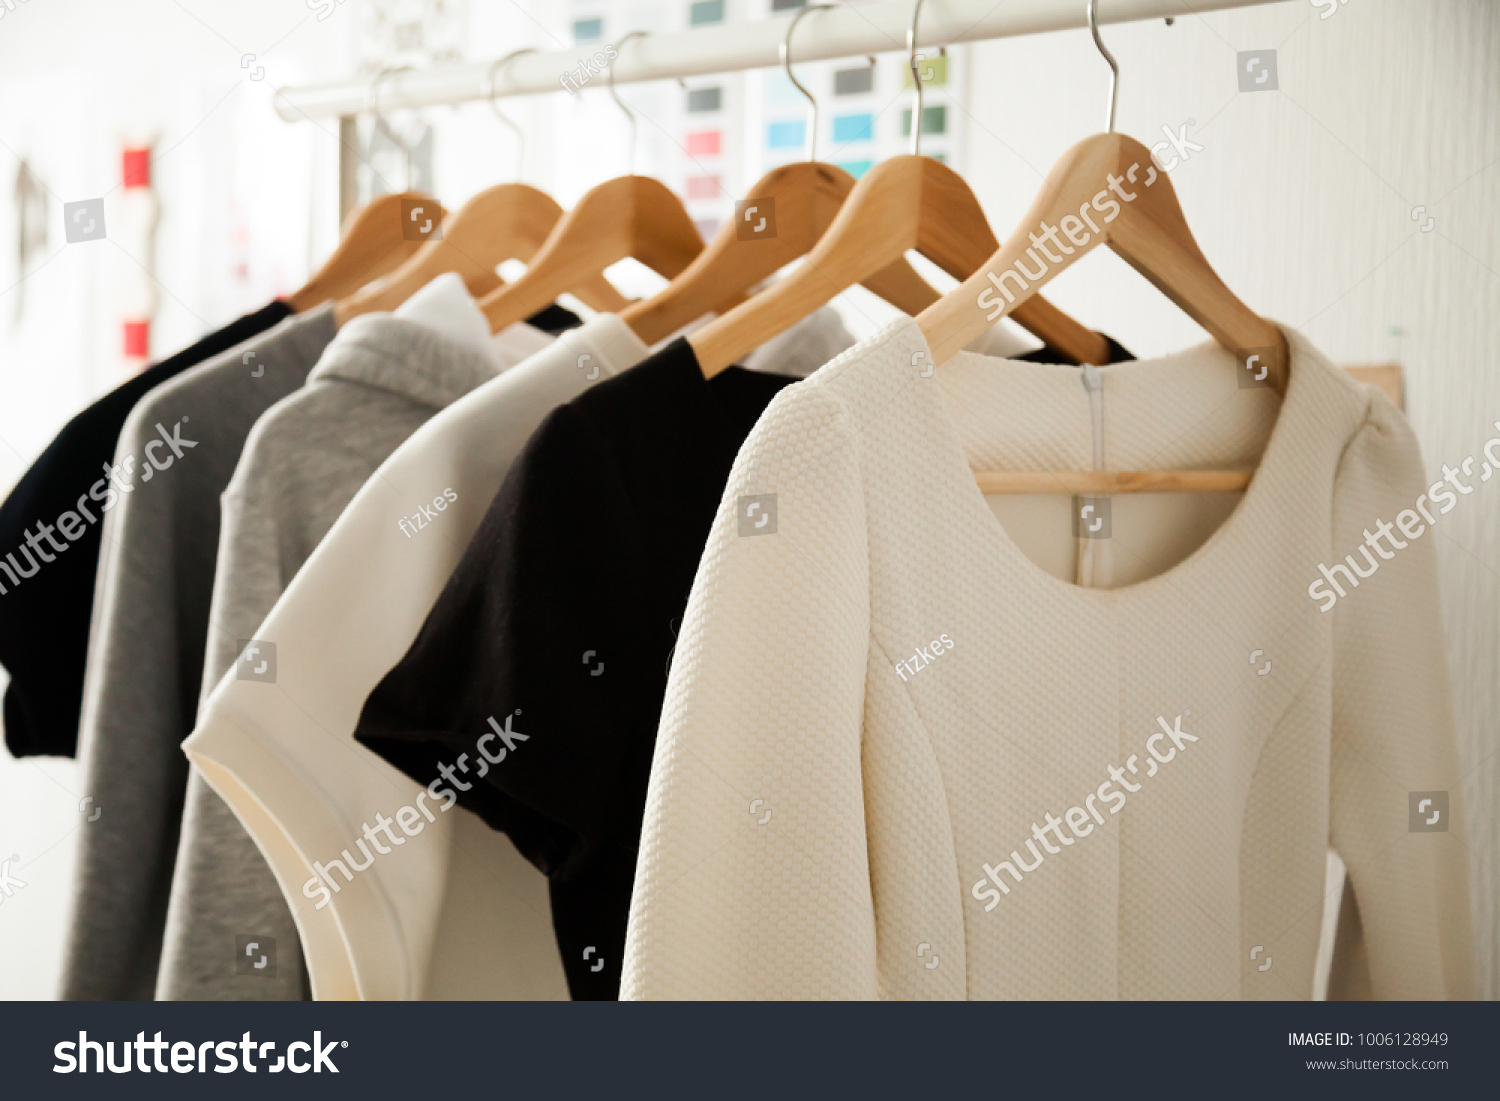 Women dresses new collection of stylish clothes wear hanging on hangers clothing rack rails, fabric samples at background, fashion design studio store concept, dressmaking tailoring sewing workshop #1006128949